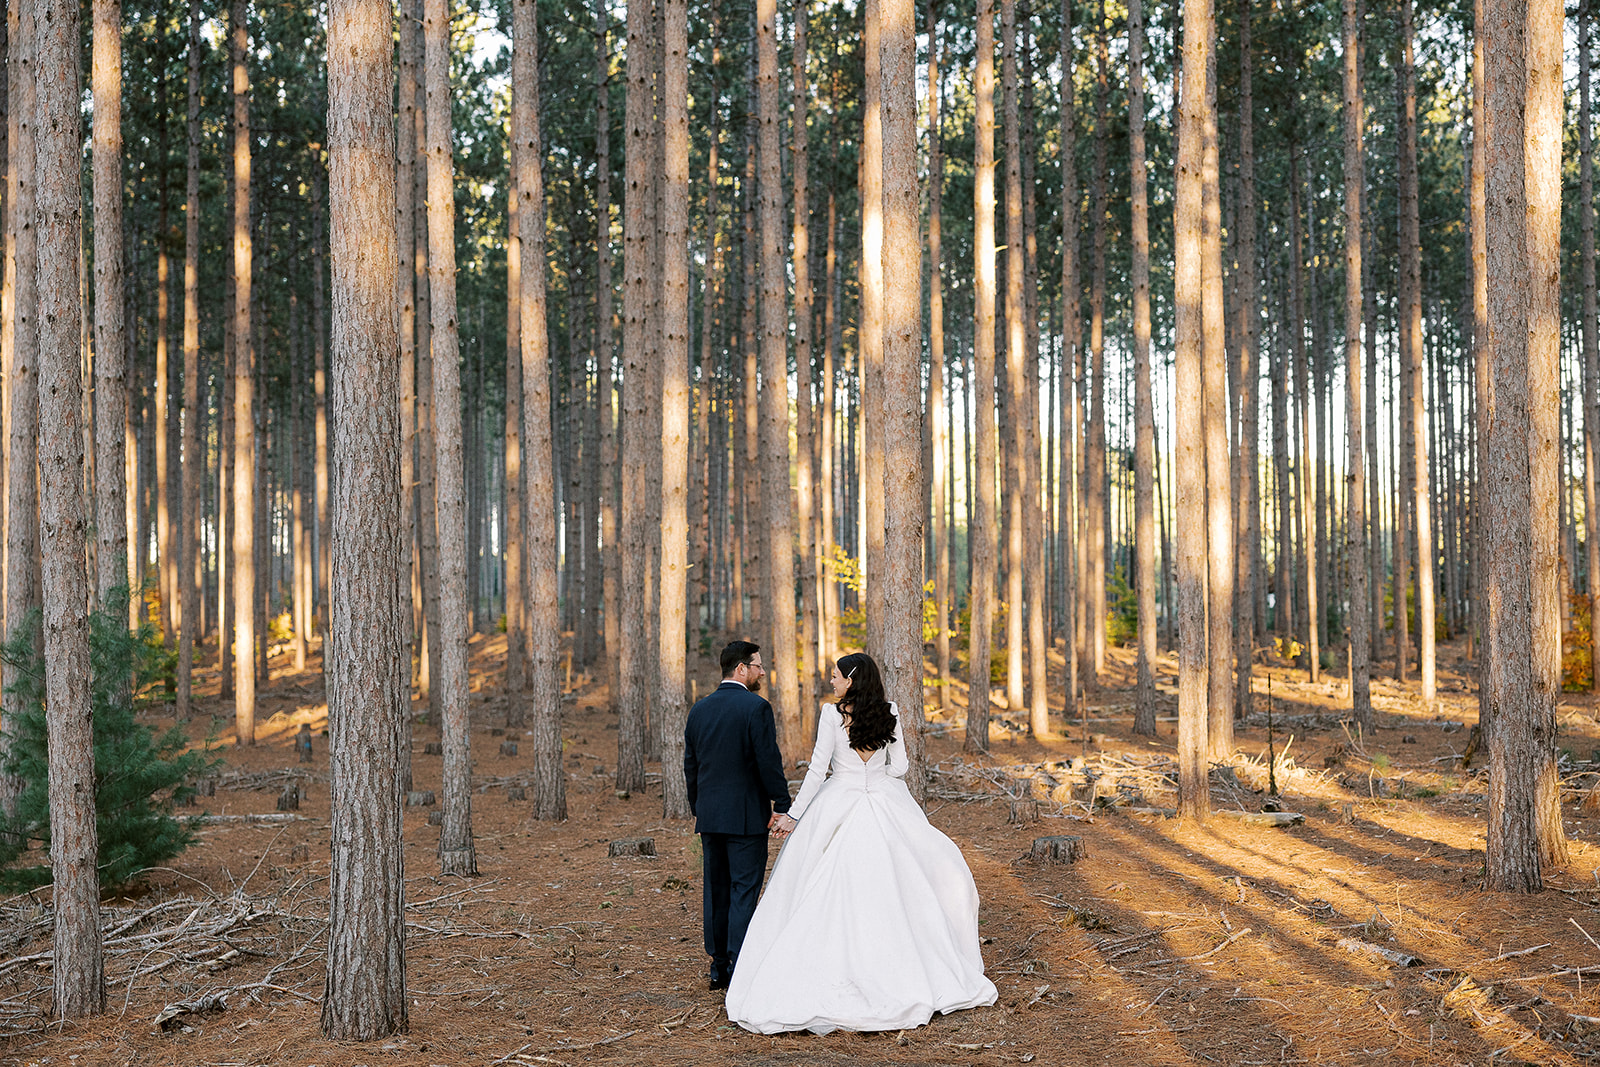 Beautiful outdoor wedding photo of bride and groom in fall